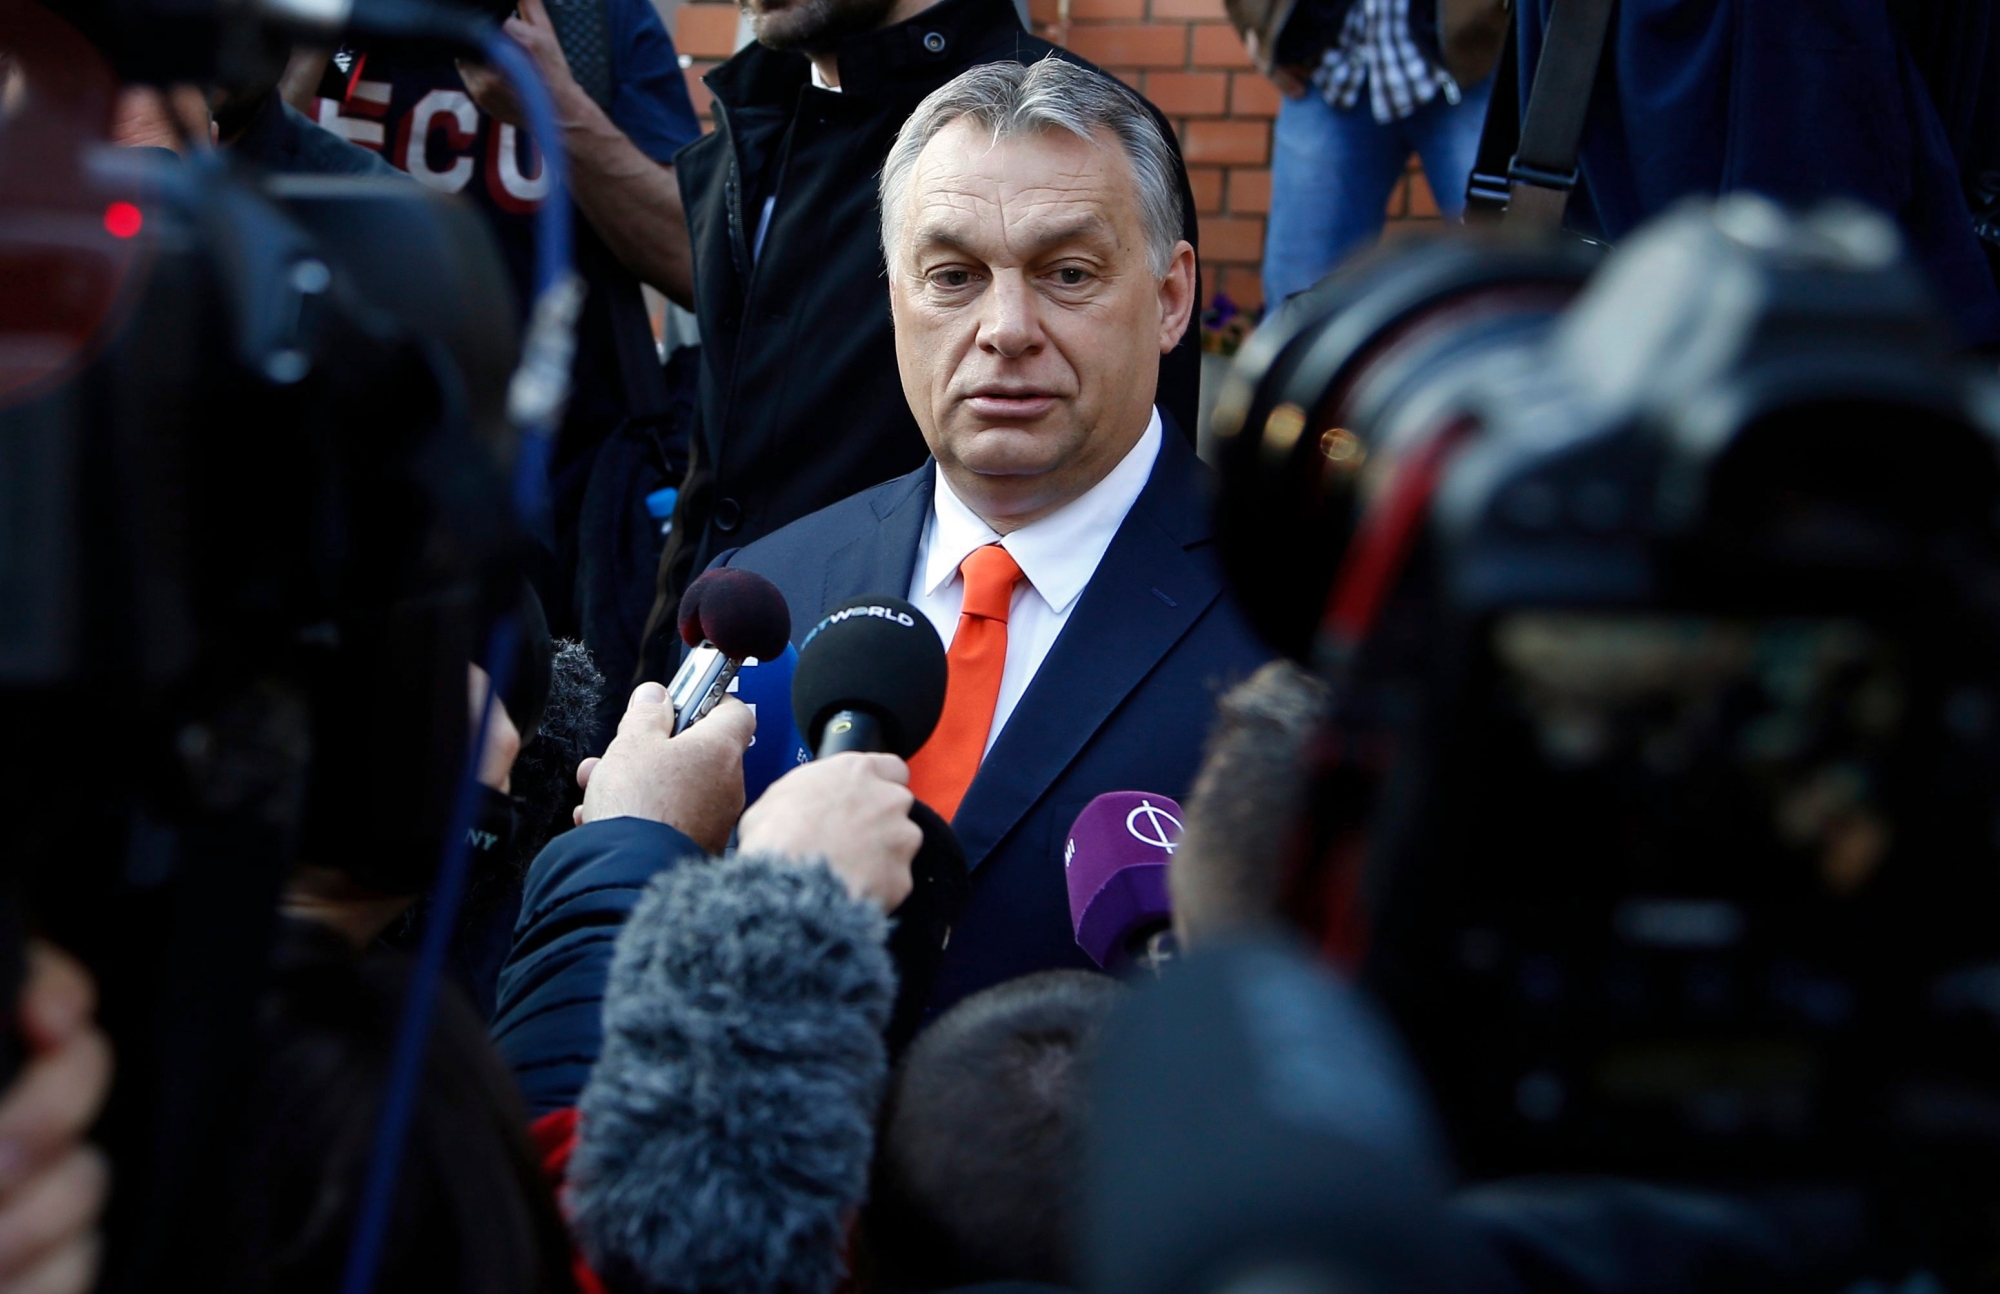 Hungary's prime minister Viktor Orban addresses the media outside a polling station in Budapest, Hungary, Sunday, April 8, 2018. Orban is expected to win his third consecutive term, and fourth overall since 1998, as voting stations opened across the country for the election of 199 parliamentary deputies. (AP Photo/Darko Vojinovic) Hungary Elections